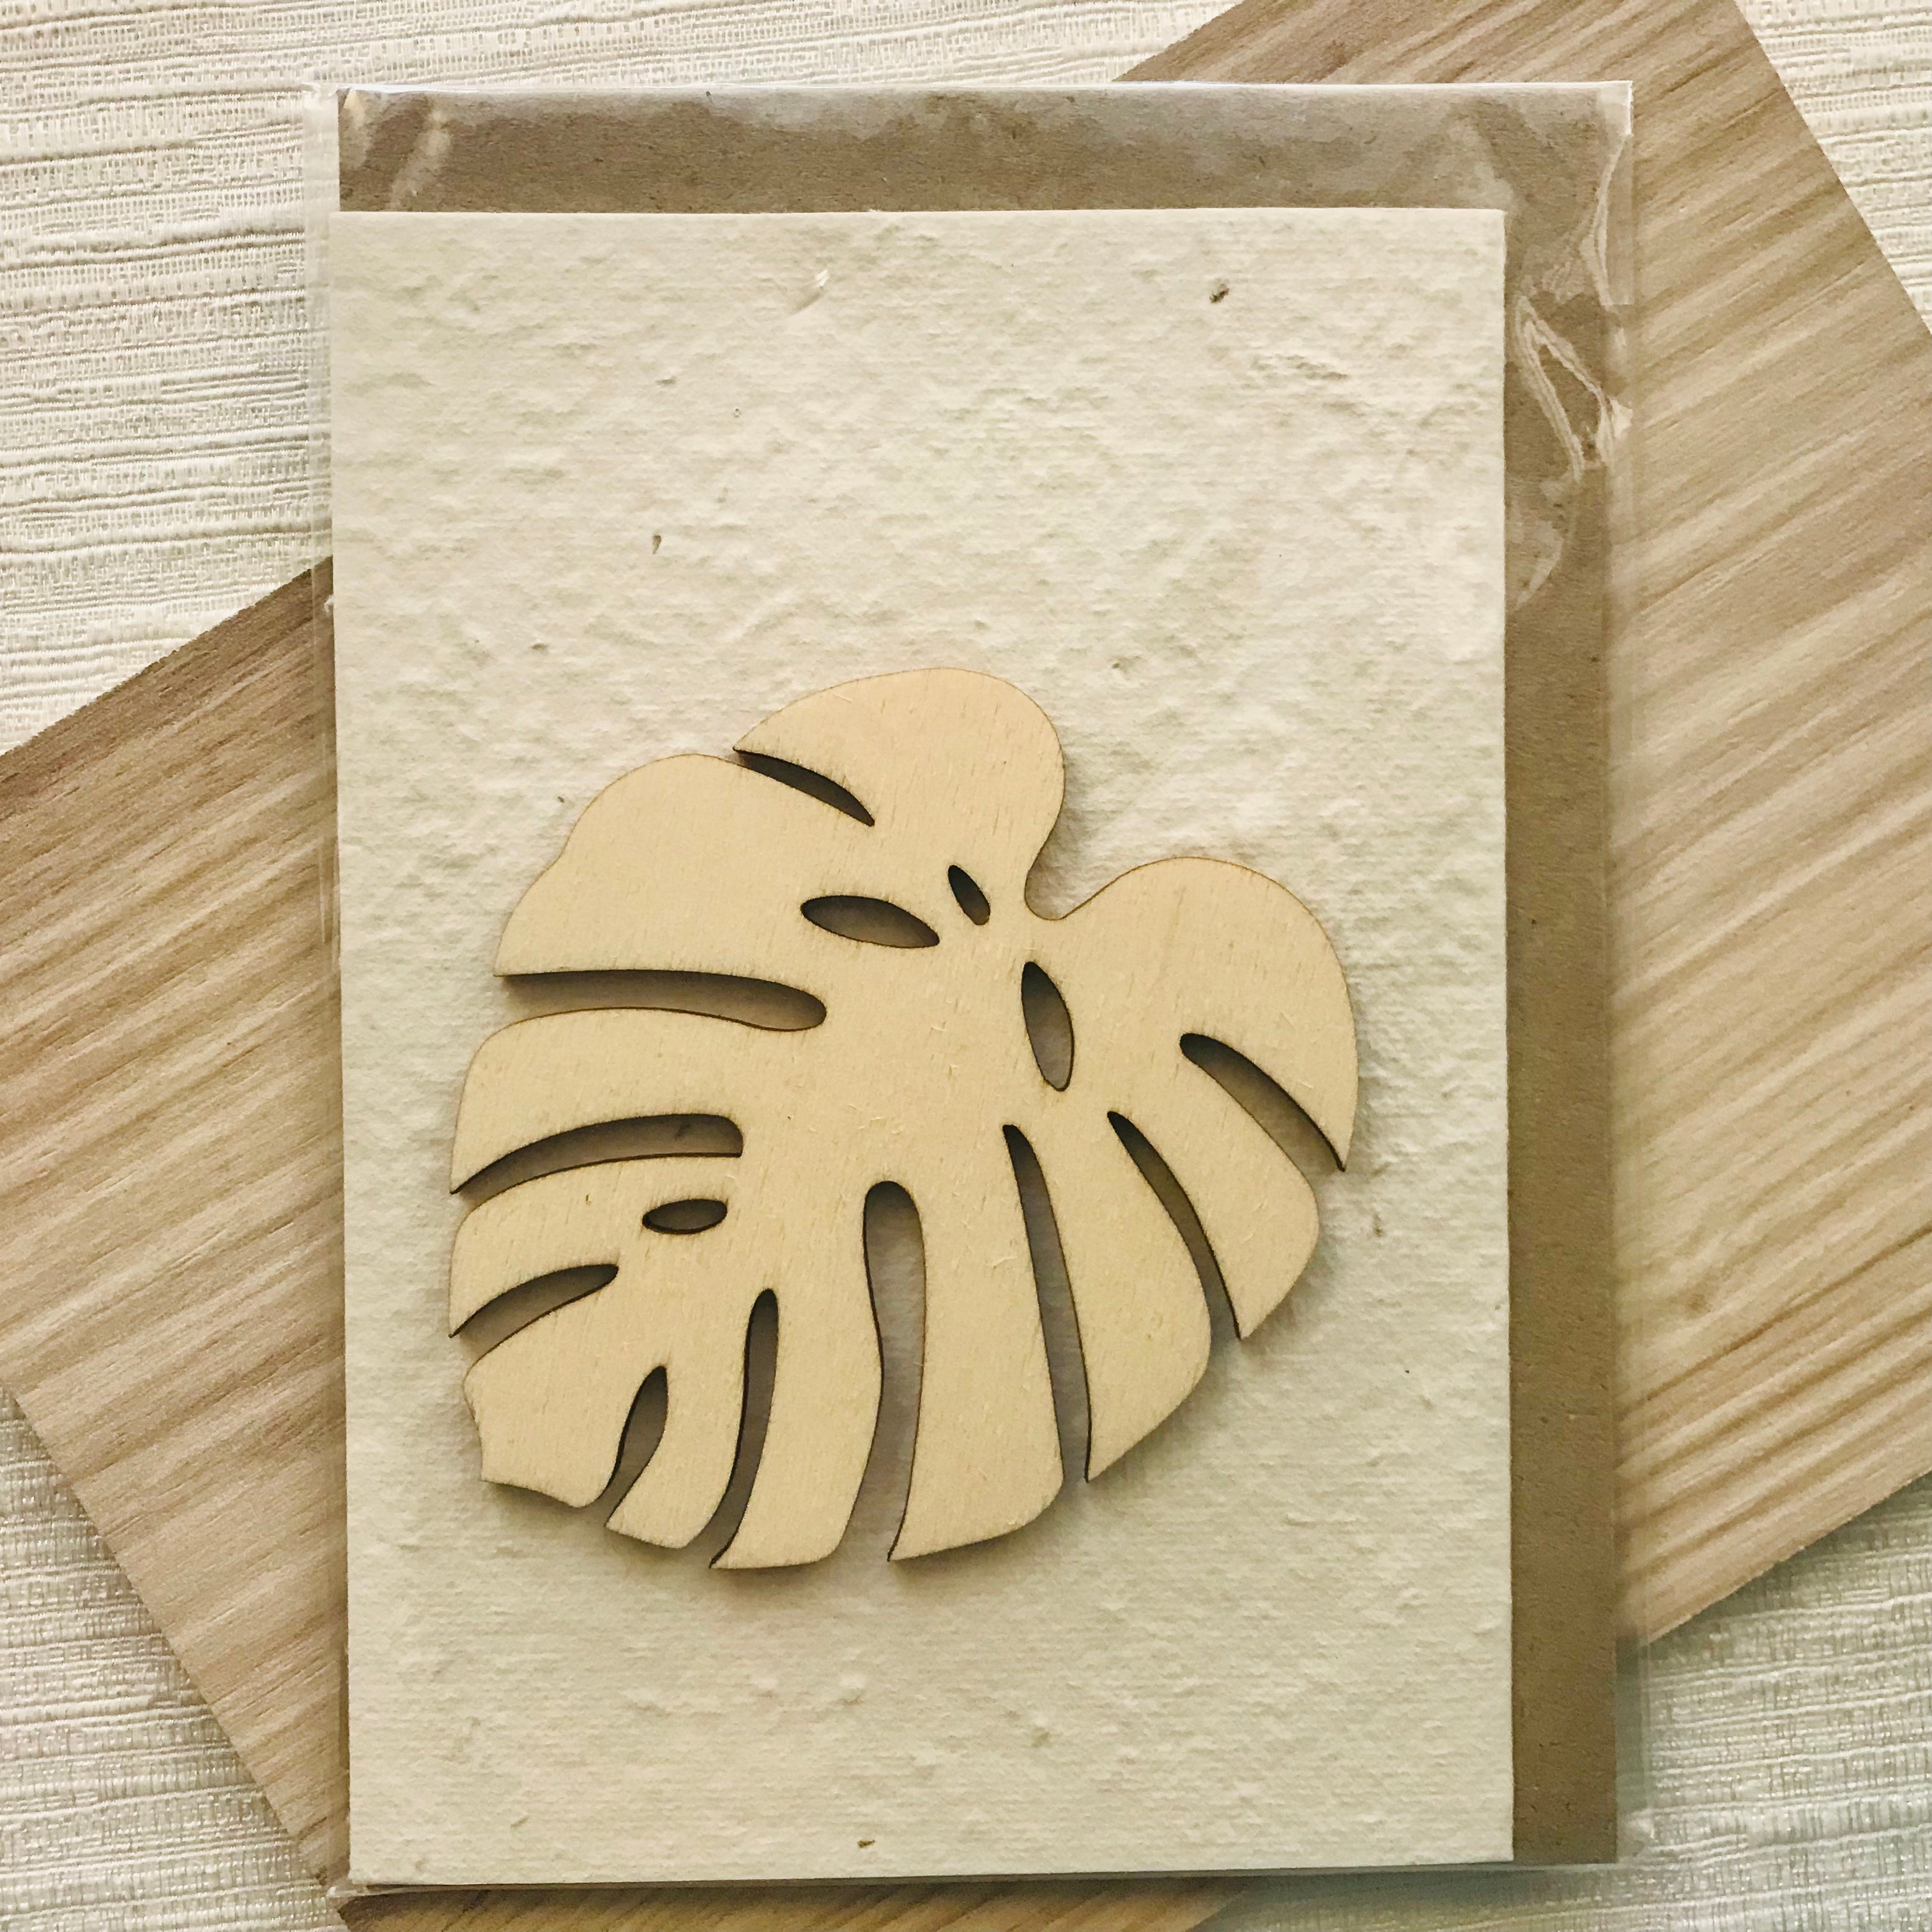 Seed cards with various wooden art